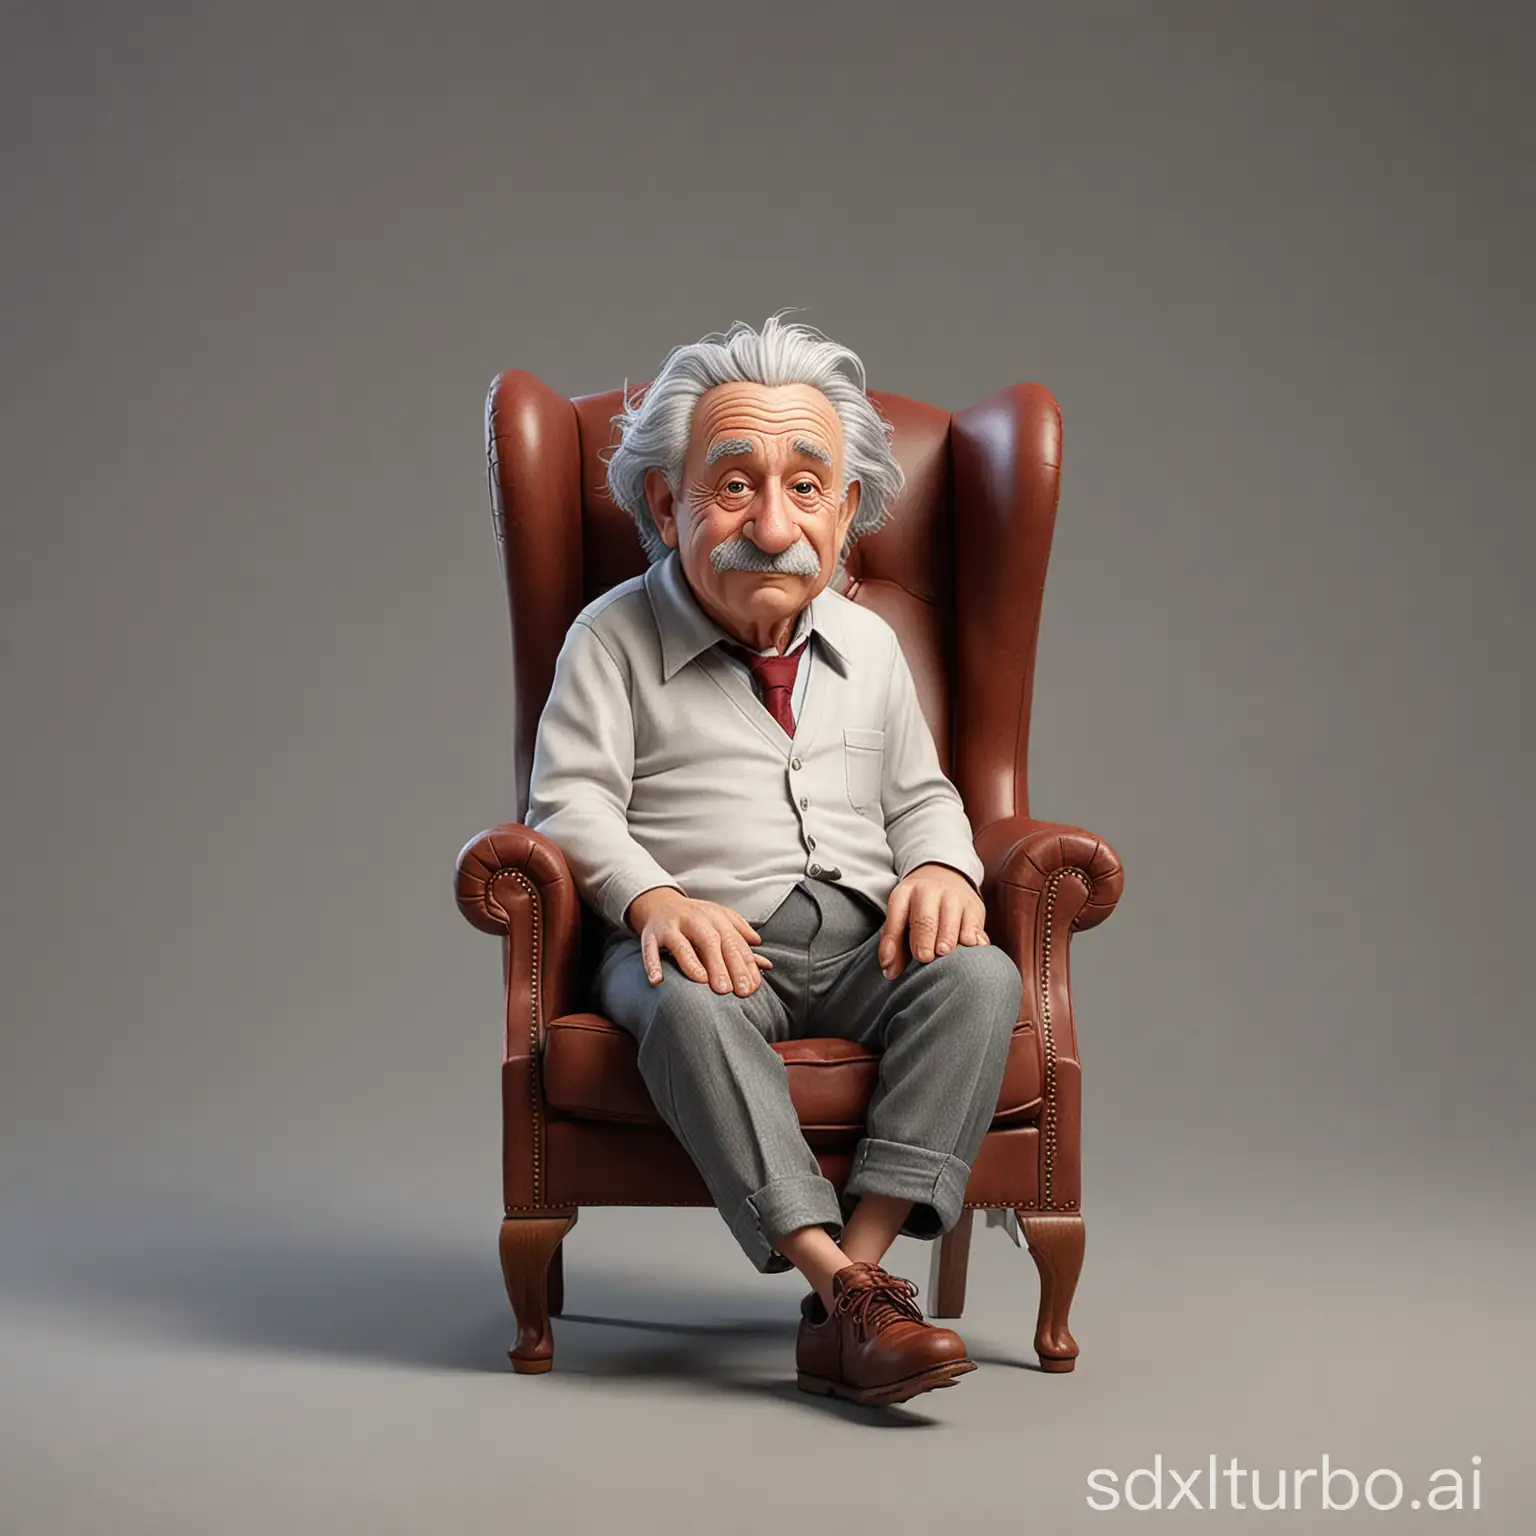 Create a caricature 3D Realistic Disney pixar style full body with a big head. Albert Einstein, a 60 year old man, is sitting relaxed in a classic dark red wingback wooden chair, the wood texture is clear. Wearing a white t-shirt covered with a gray jacket, wearing worn gray cloth trousers. Wearing brown shoes with black shoelaces. Sit with your legs crossed, your right hand holding a short wooden stick, your left hand placed on the edge of the chair. The background should contrast with the color of the chair and clothing,enhancing the overall composition of the picture. Use soft photography lighting, dramatic overhead lighting, very high image quality, clear character details, UHD, 16k.